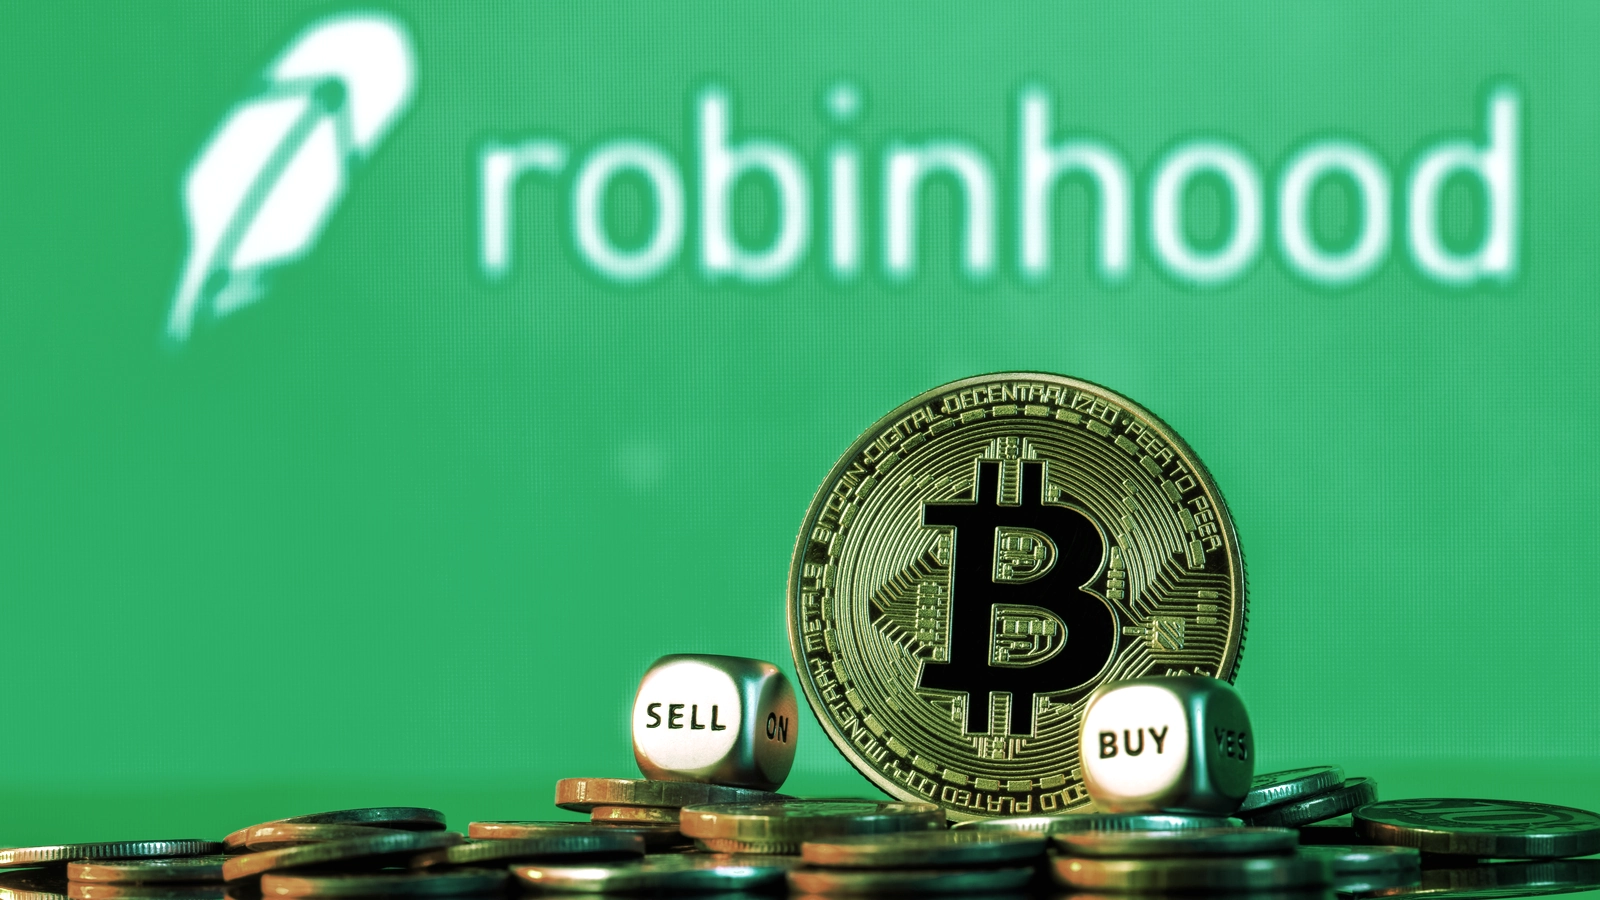 Robinhood Announces Bitcoin As The Most Traded Asset On The Platform In 2022